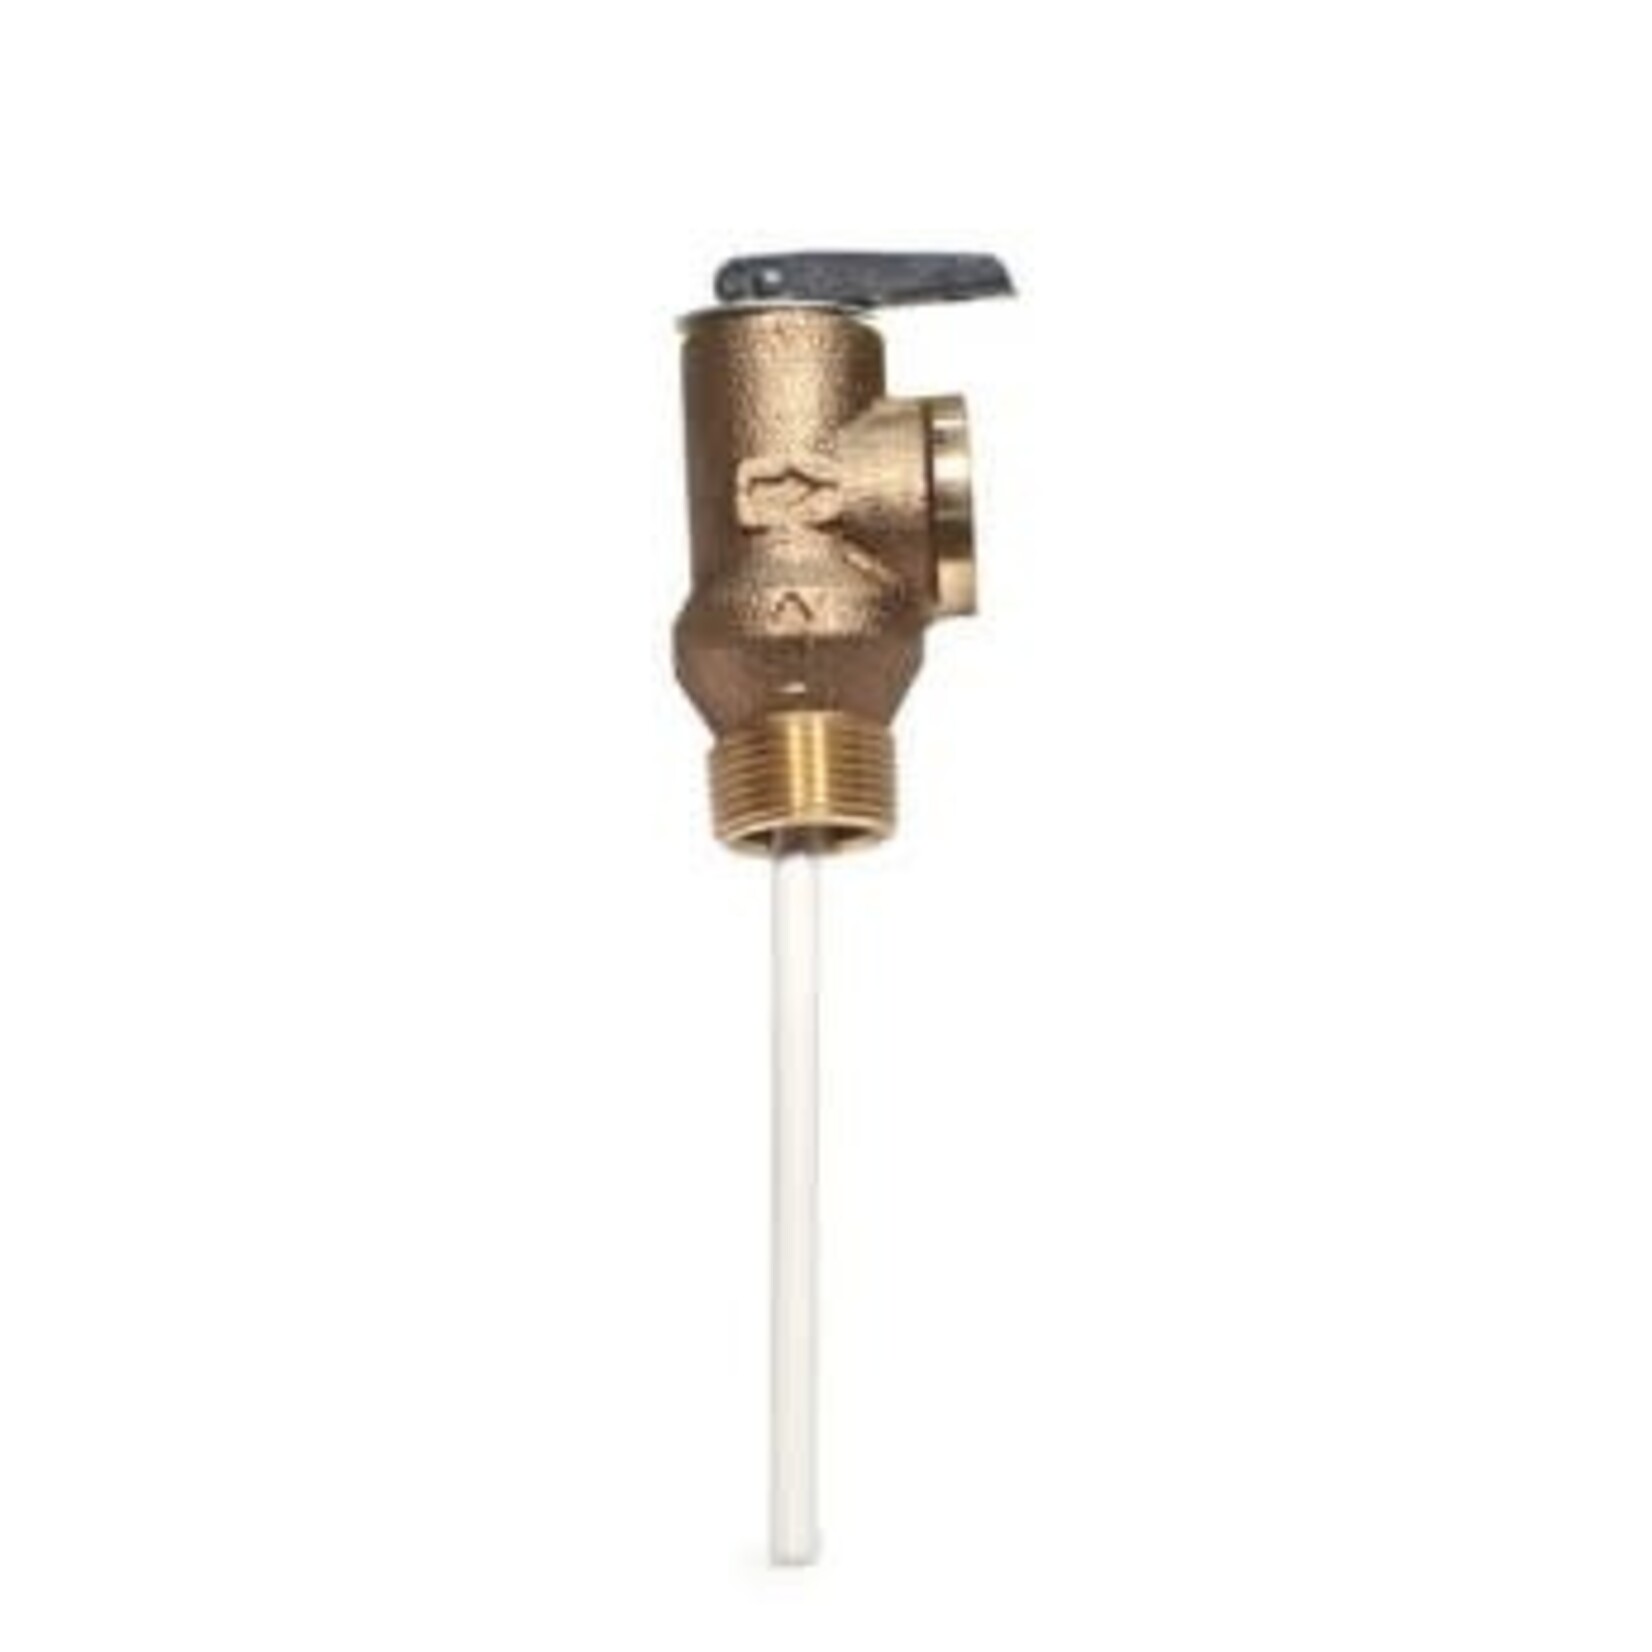 WATTS 3/4 IN WATTS TEMPERATURE AND PRESSURE SAFETY RELIEF VALVE